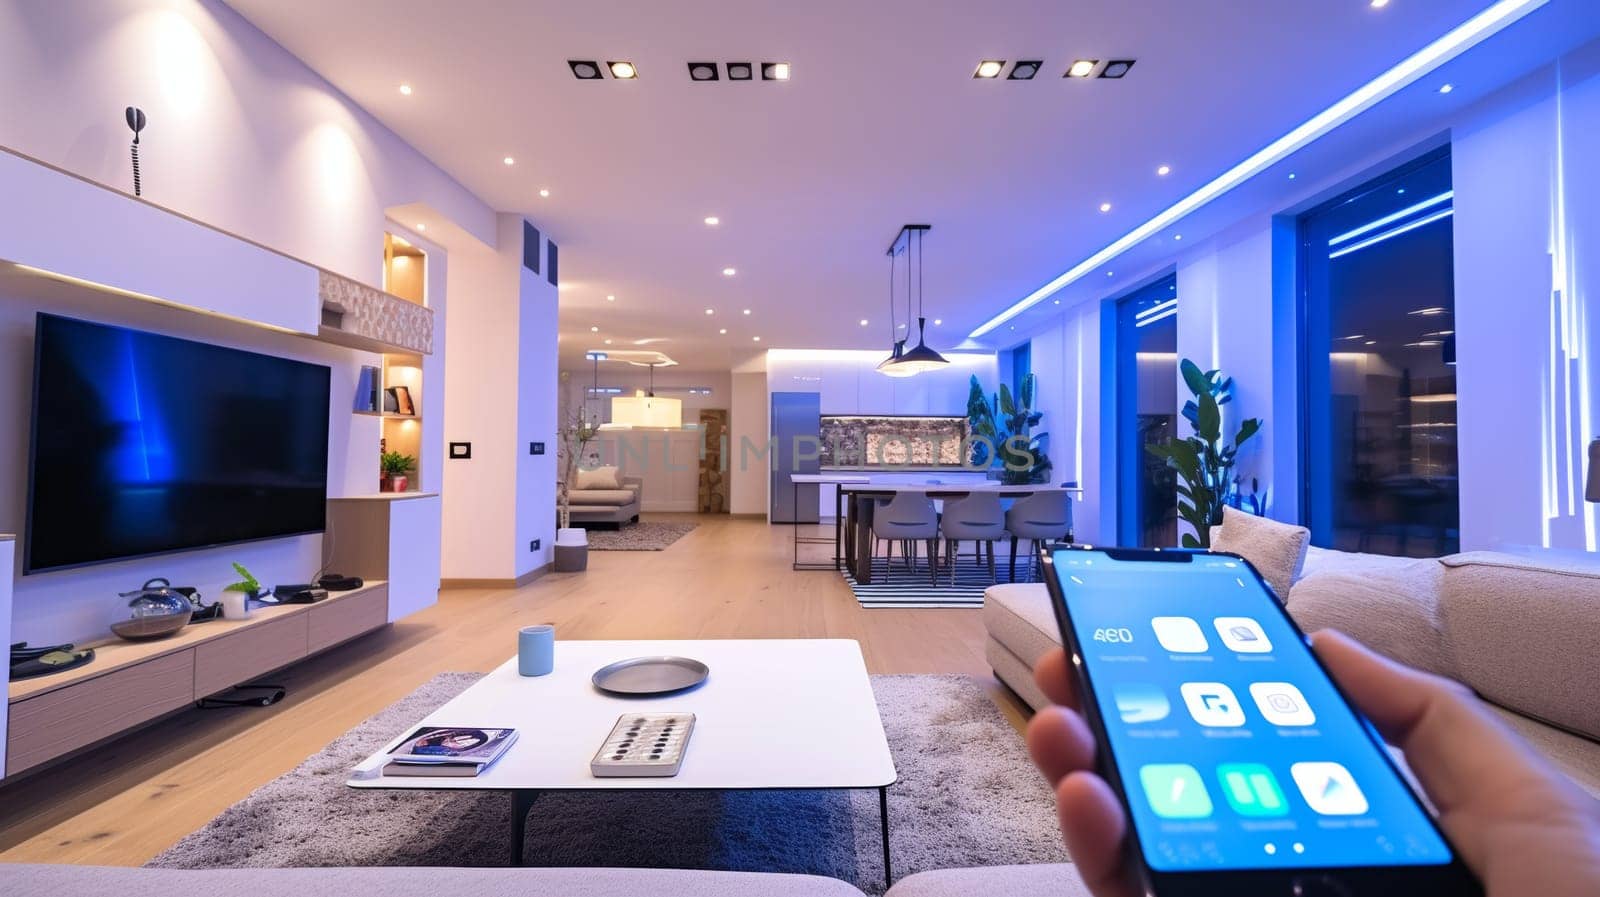 Modern living room with a person controlling rooms lighting using a smartphone